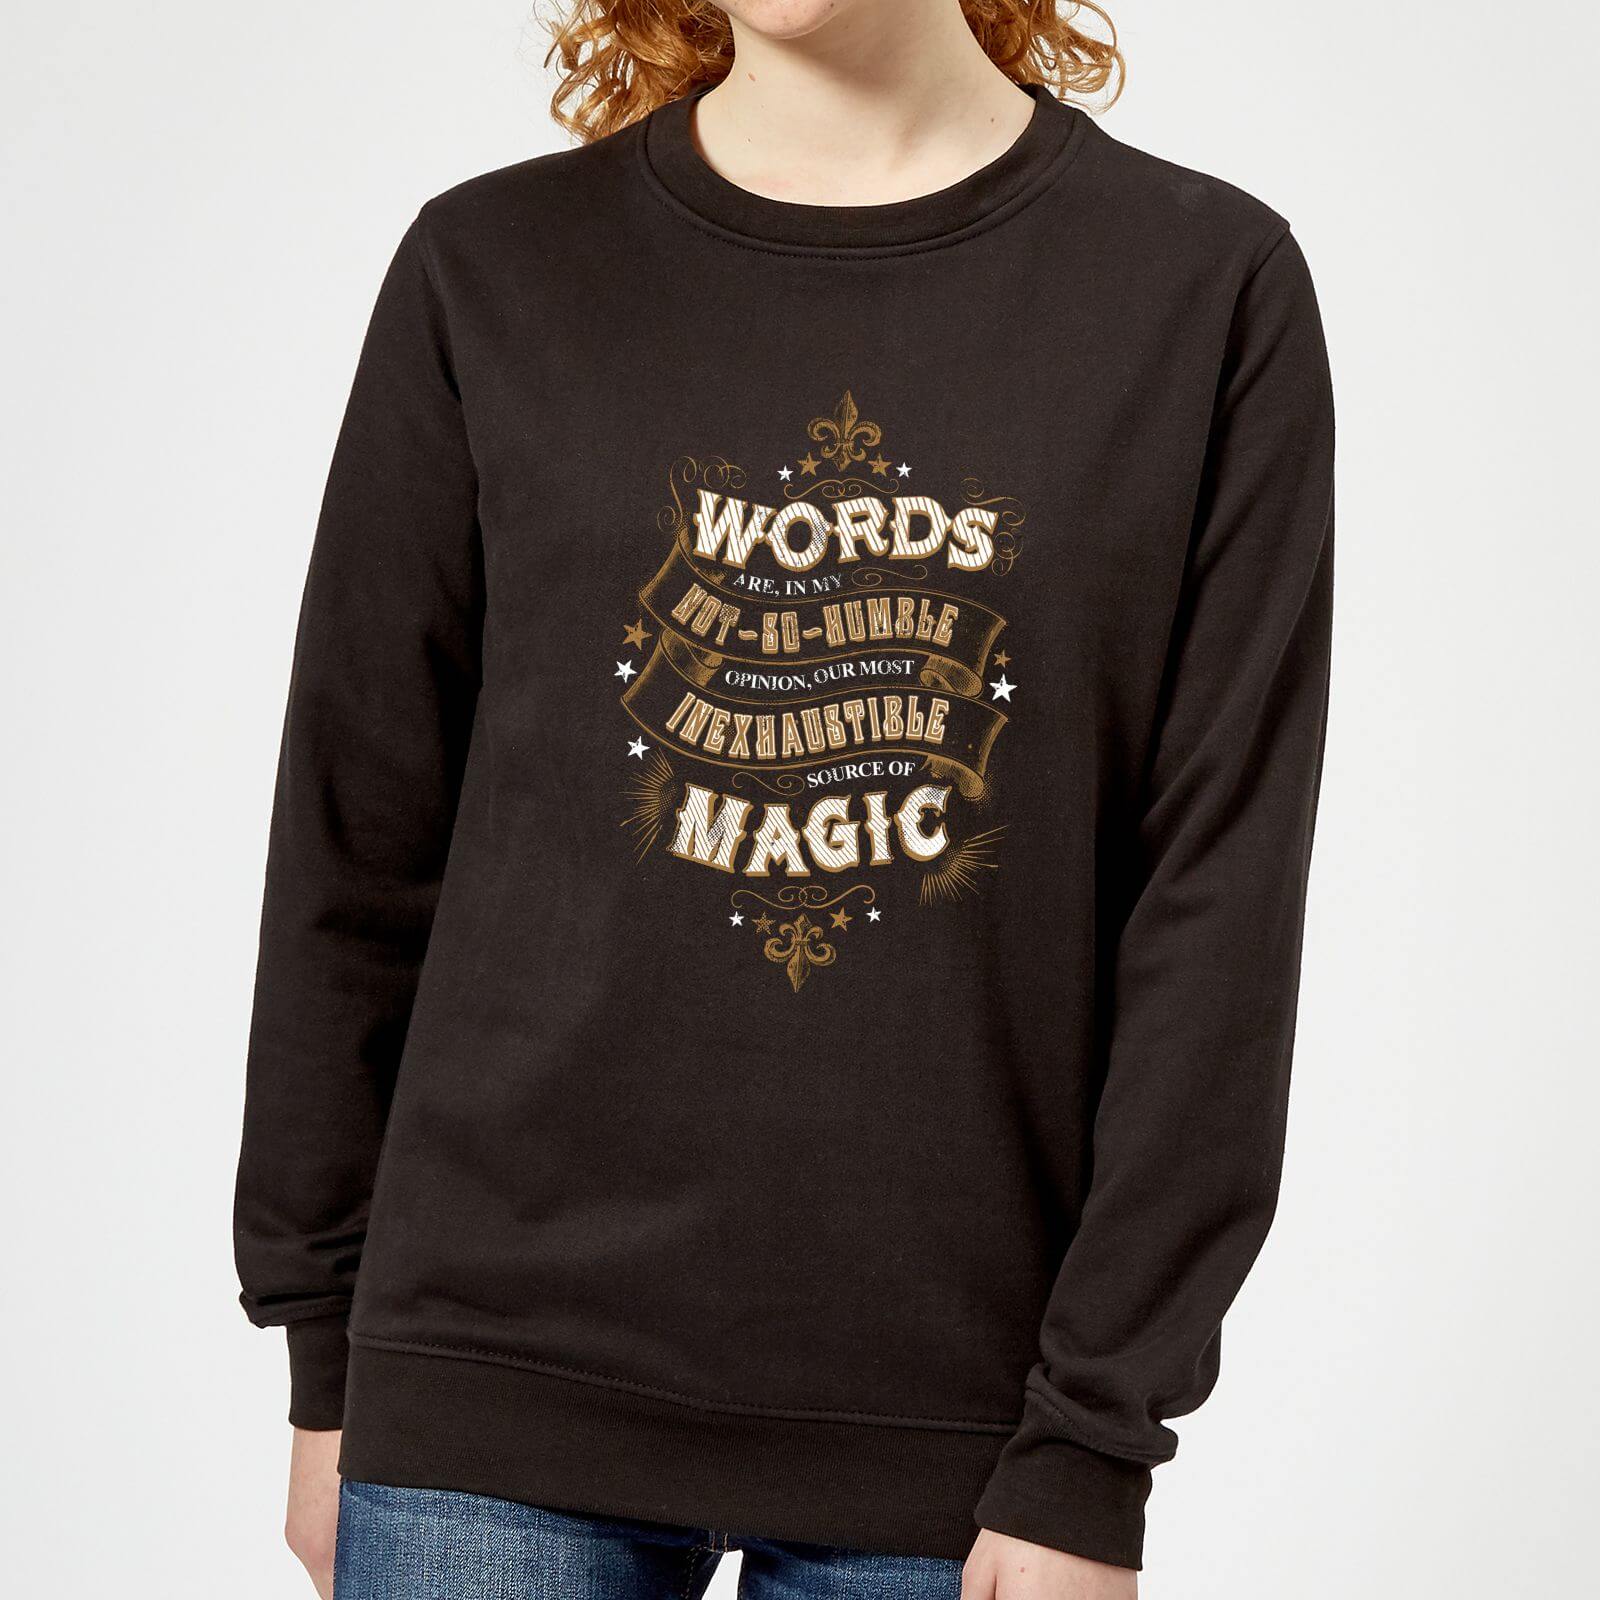 Harry Potter Words Are, In My Not So Humble Opinion Women's Sweatshirt - Black - XXL - Black